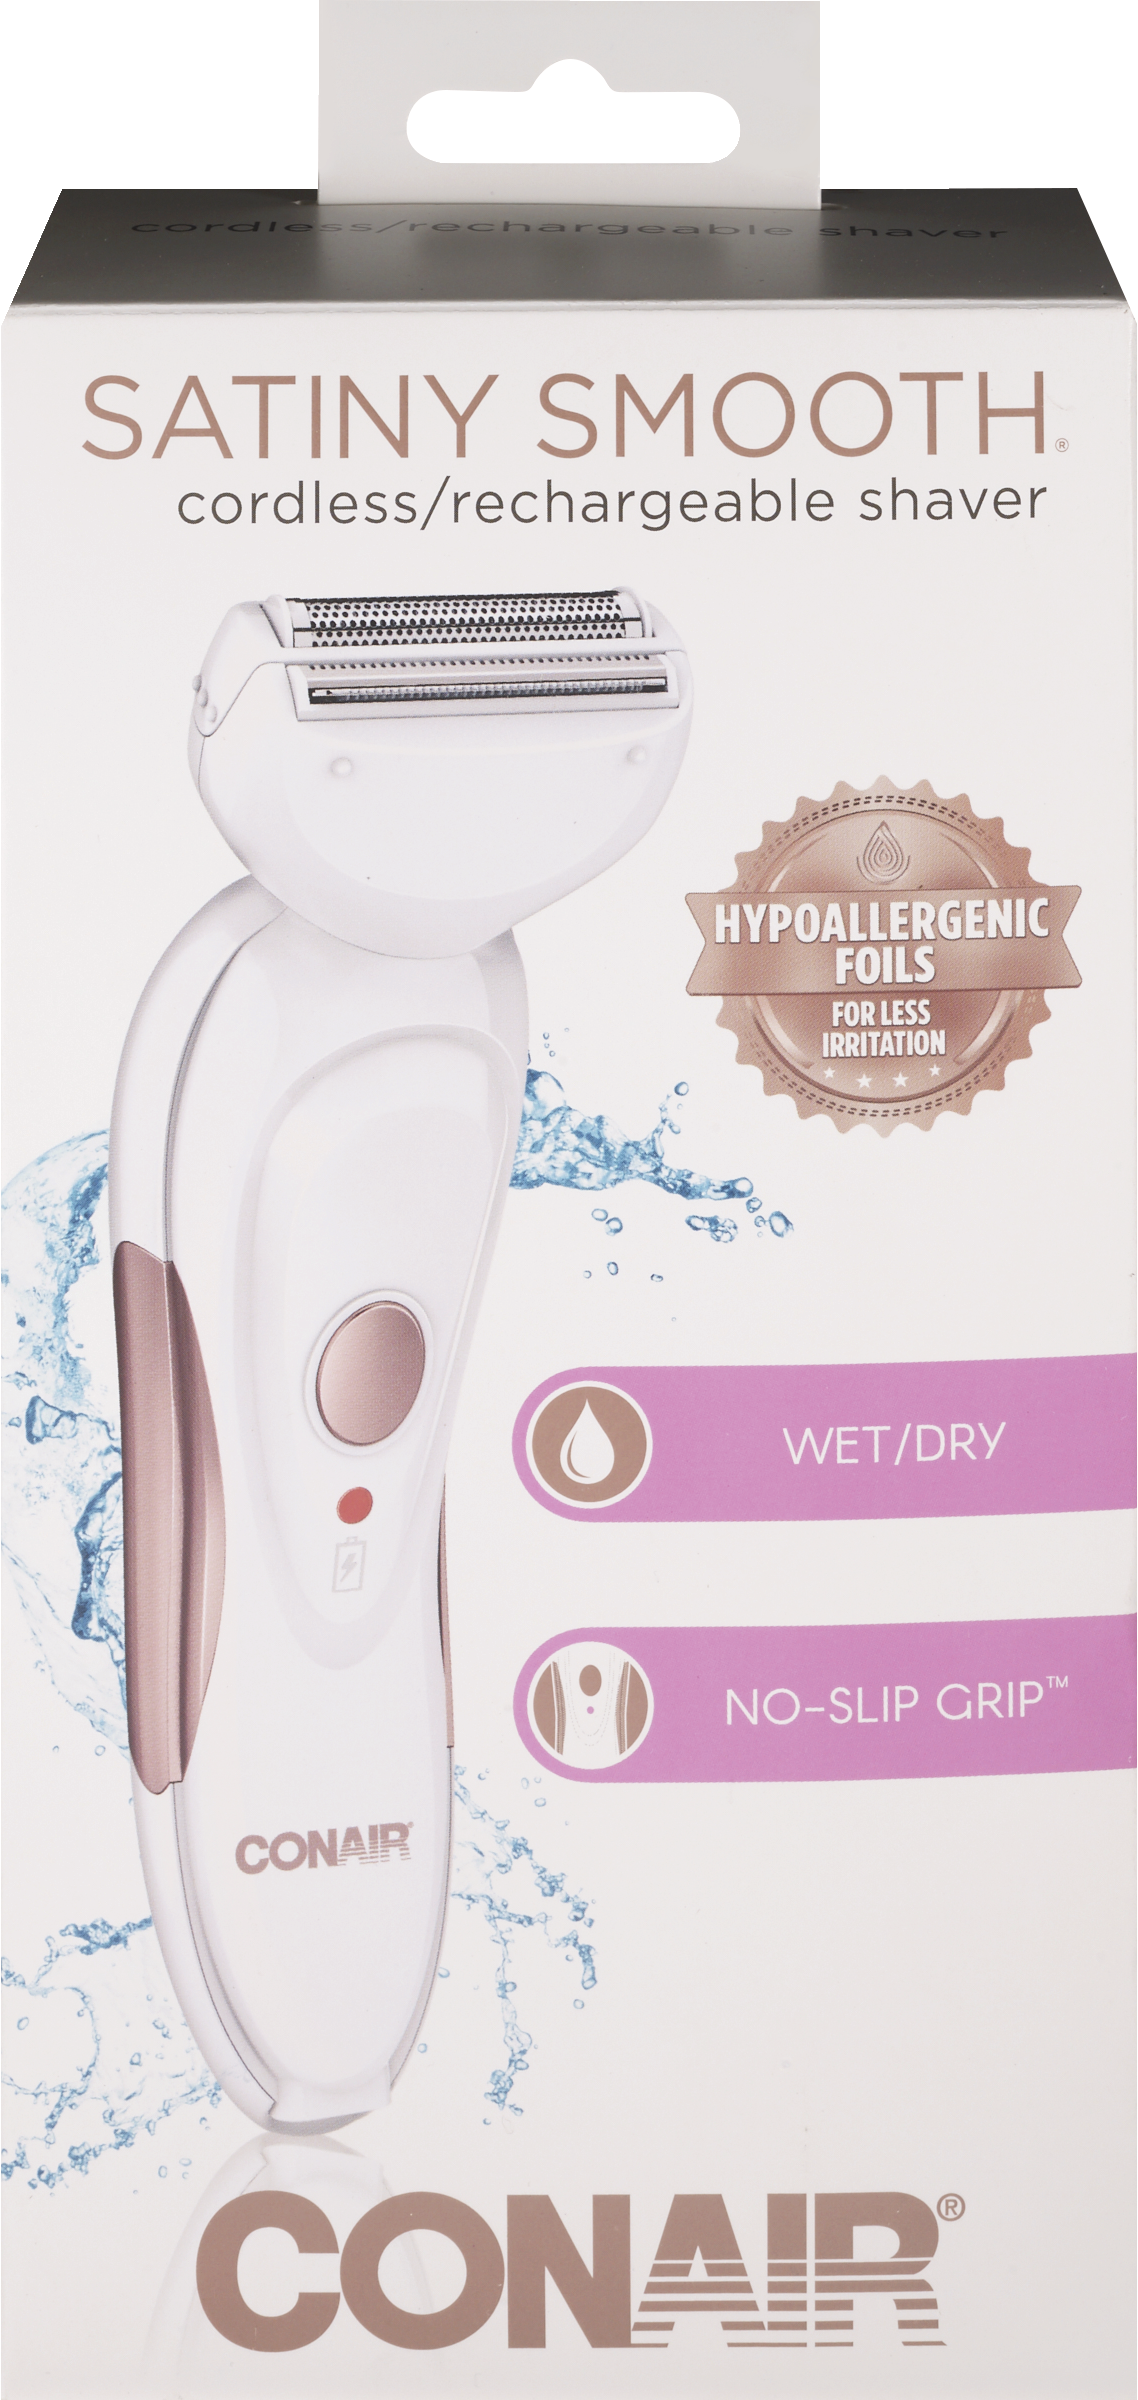 Conair Girlbomb All-in-One Shave & Trim System